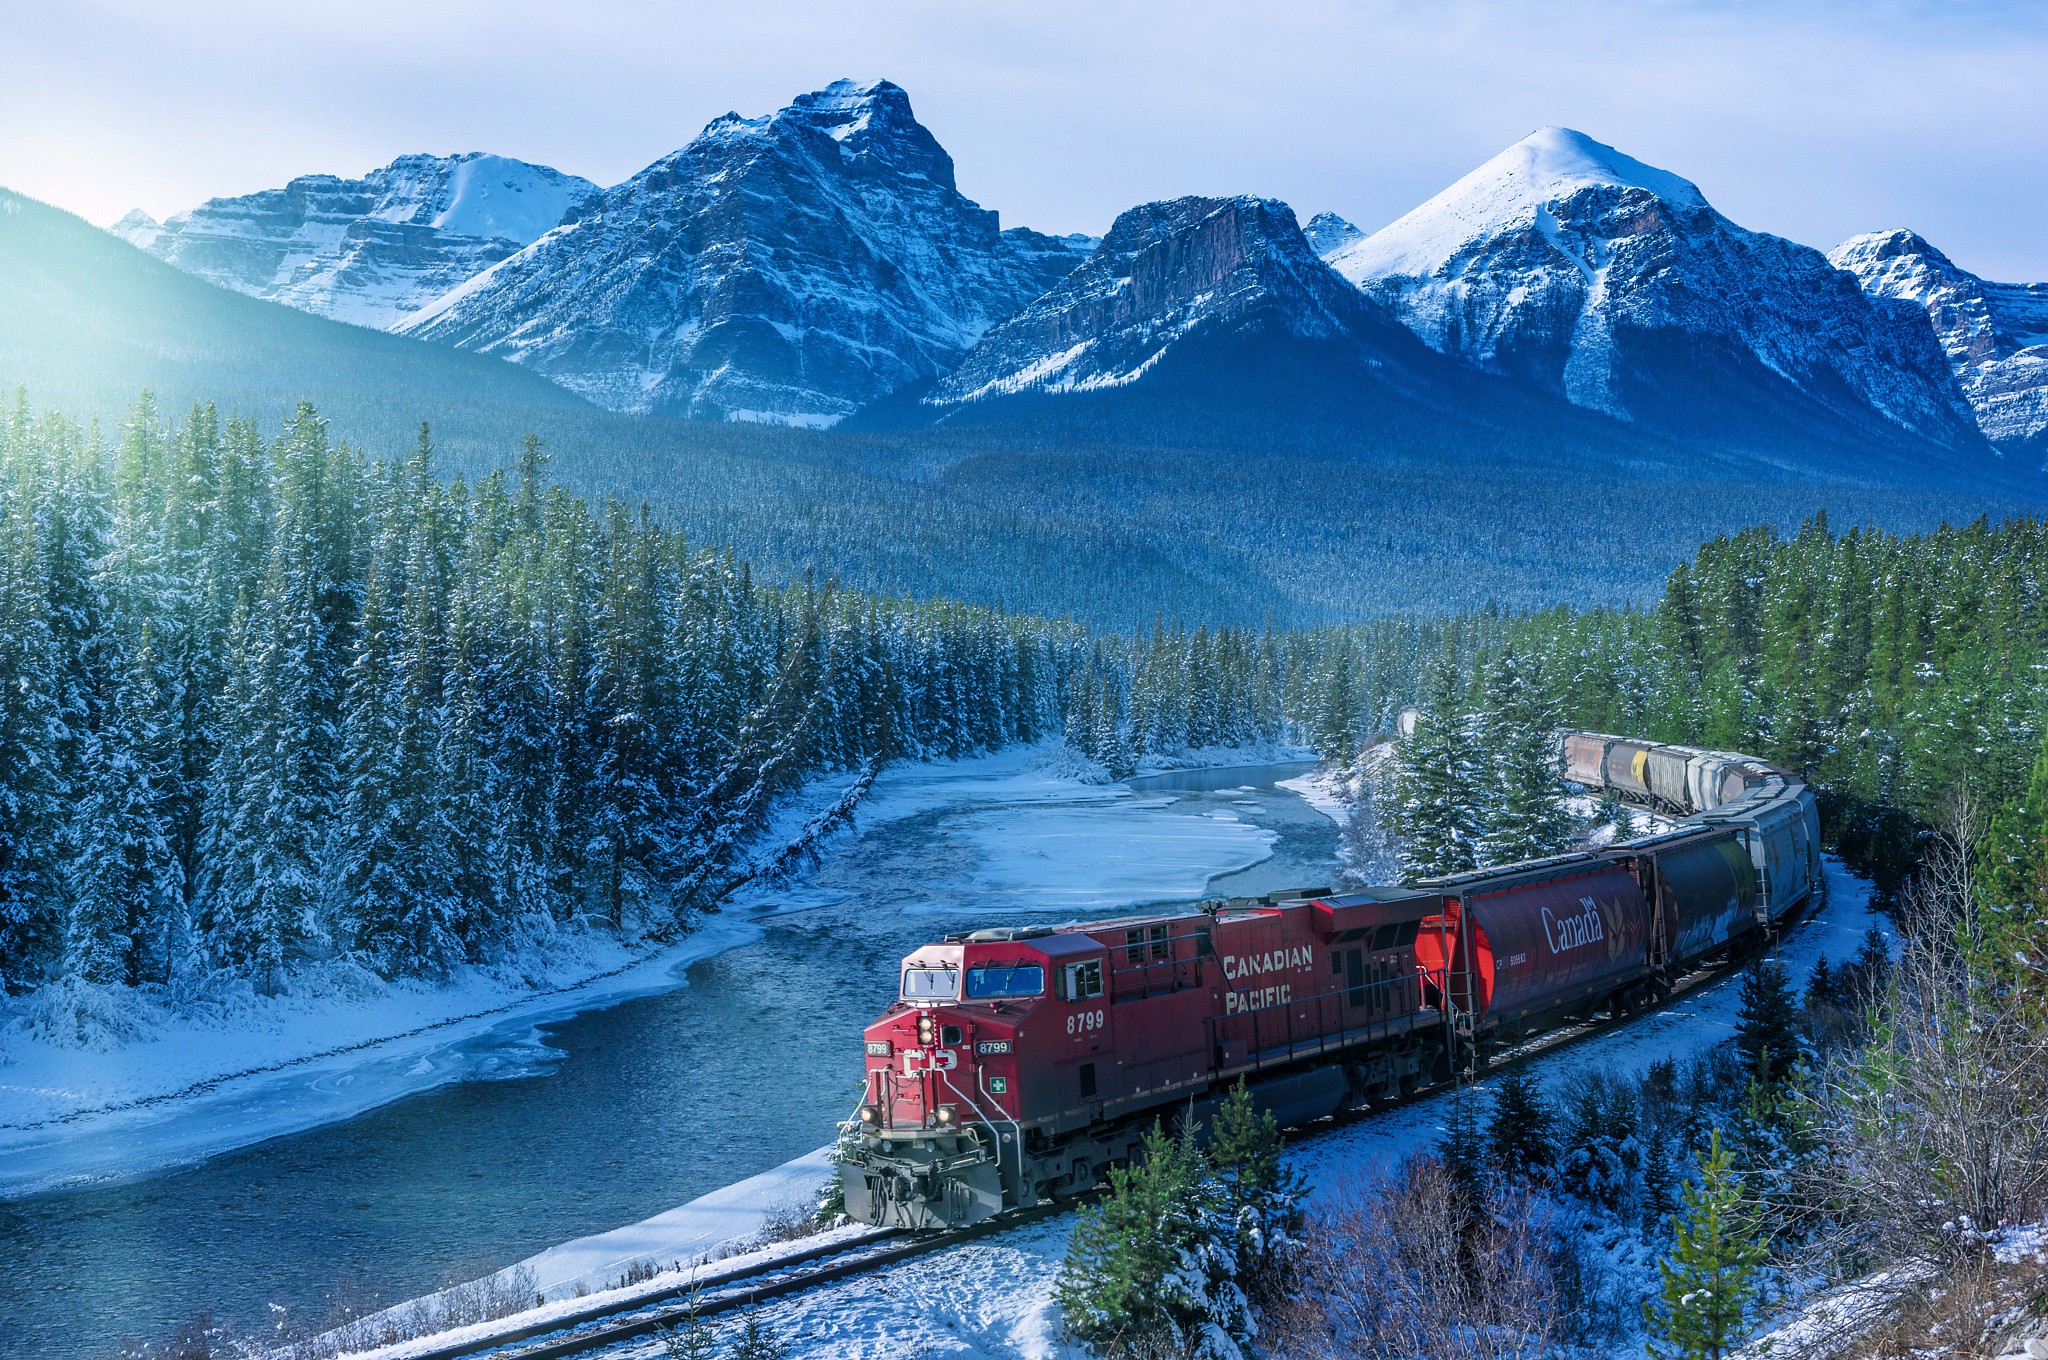 General 2048x1360 train Canada landscape mountains trees snow snowy peak forest railway river ice Rocky Mountains vehicle nature outdoors cold numbers Canadian Pacific Railway